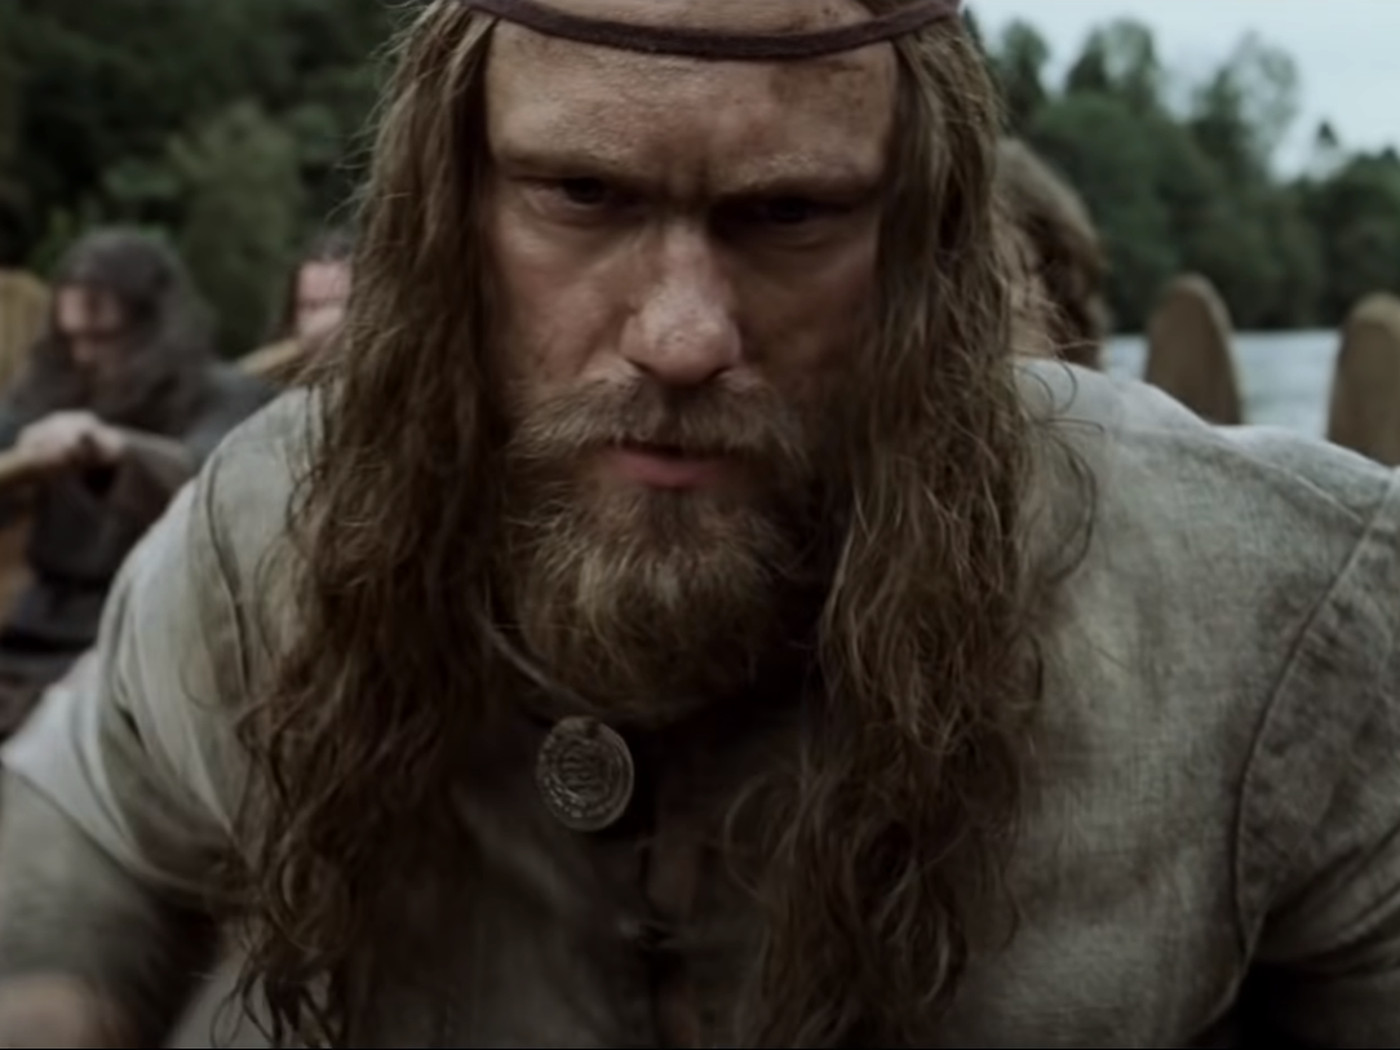 New trailers: The Northman, Super Pumped: The Battle for Uber, The Silent Sea, and more